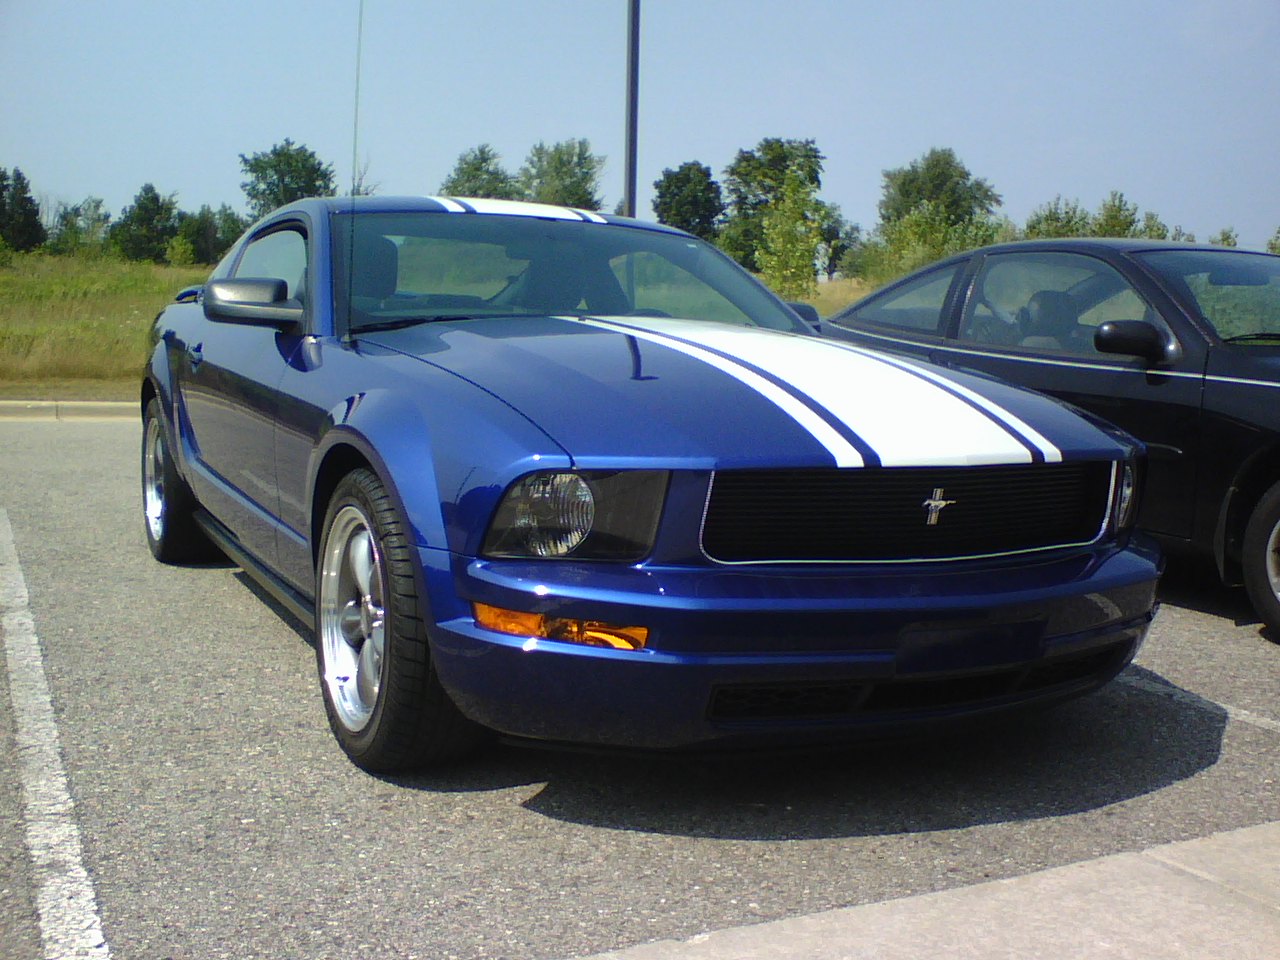 2005 Ford mustang 0-60 #3